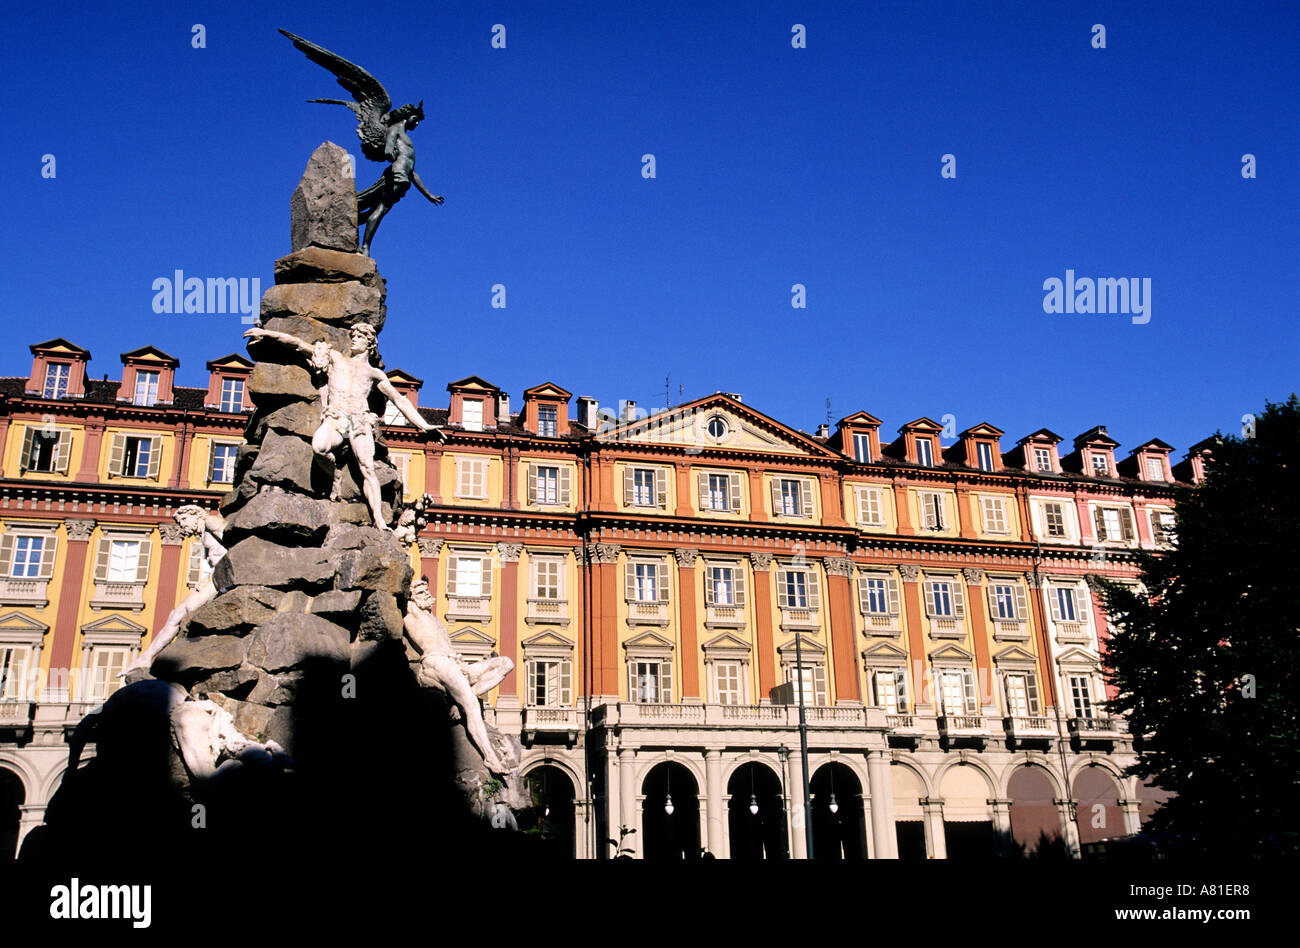 Italy, Piedmont region, Torino city, the Piazza Statuto, an angel sculpted by Belli Stock Photo